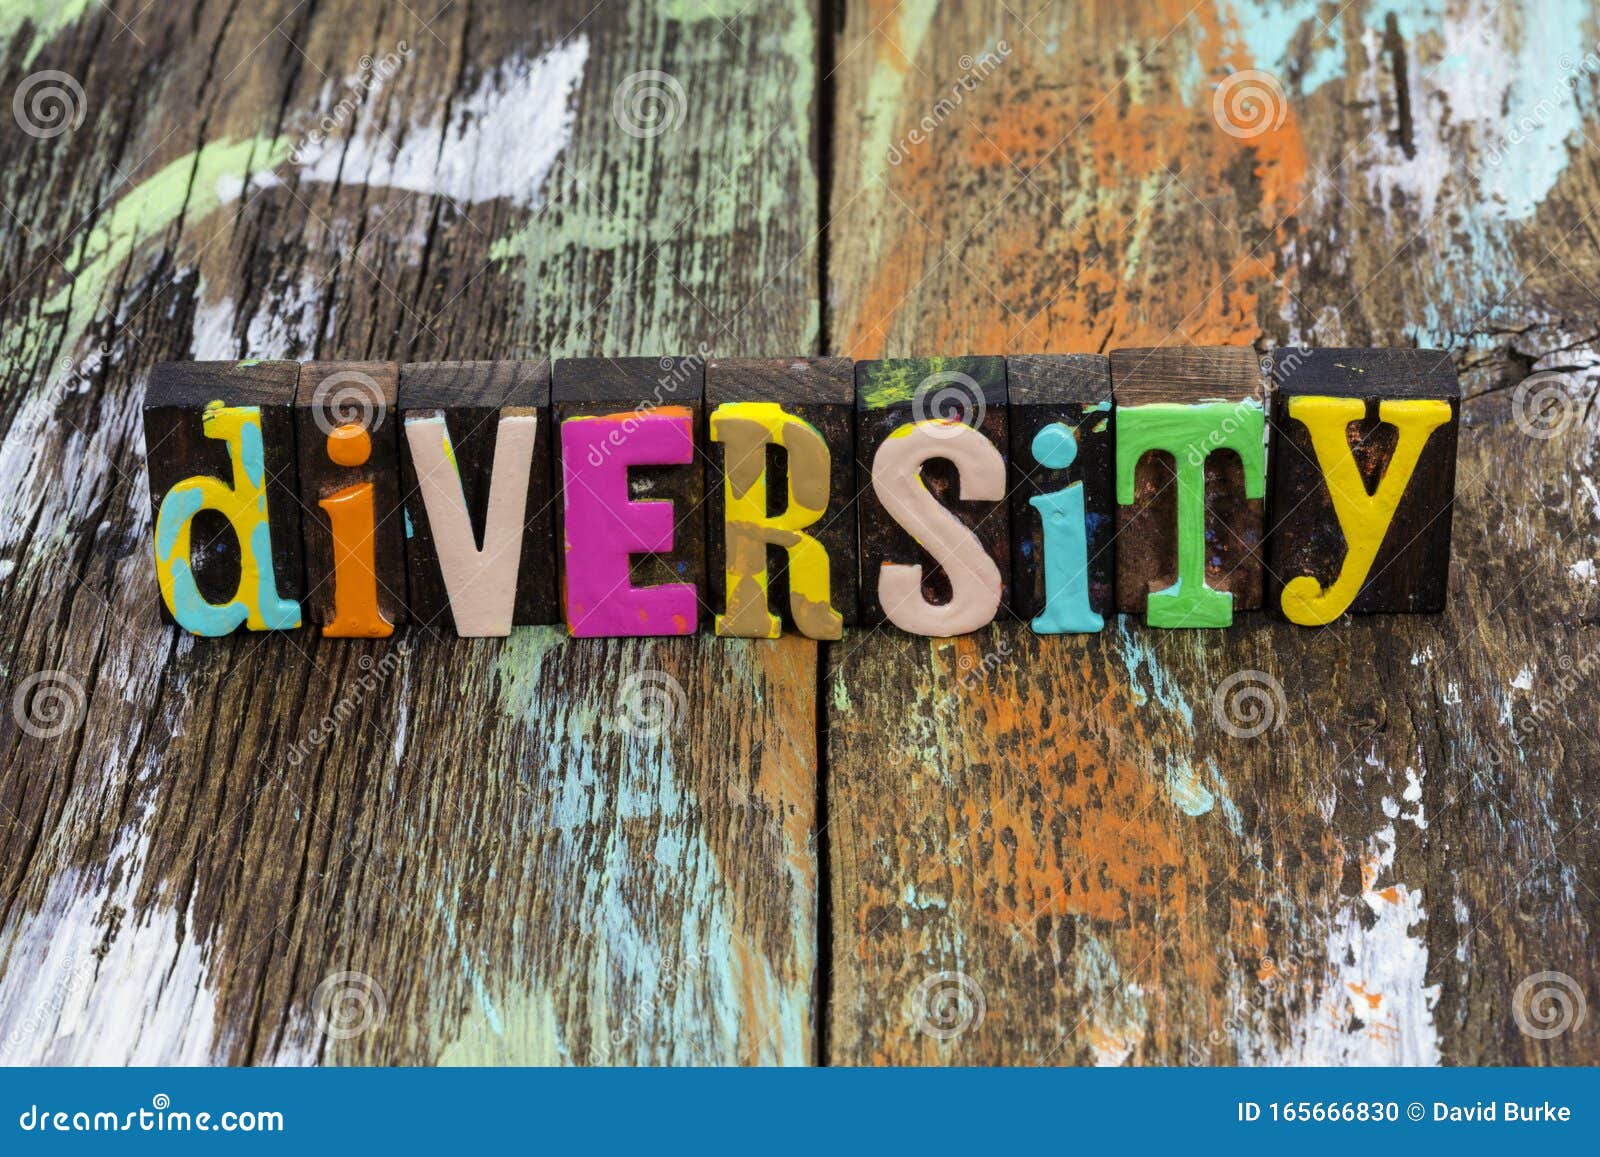 diversity multi ethnic ethnicity racial difference team work together discrimination